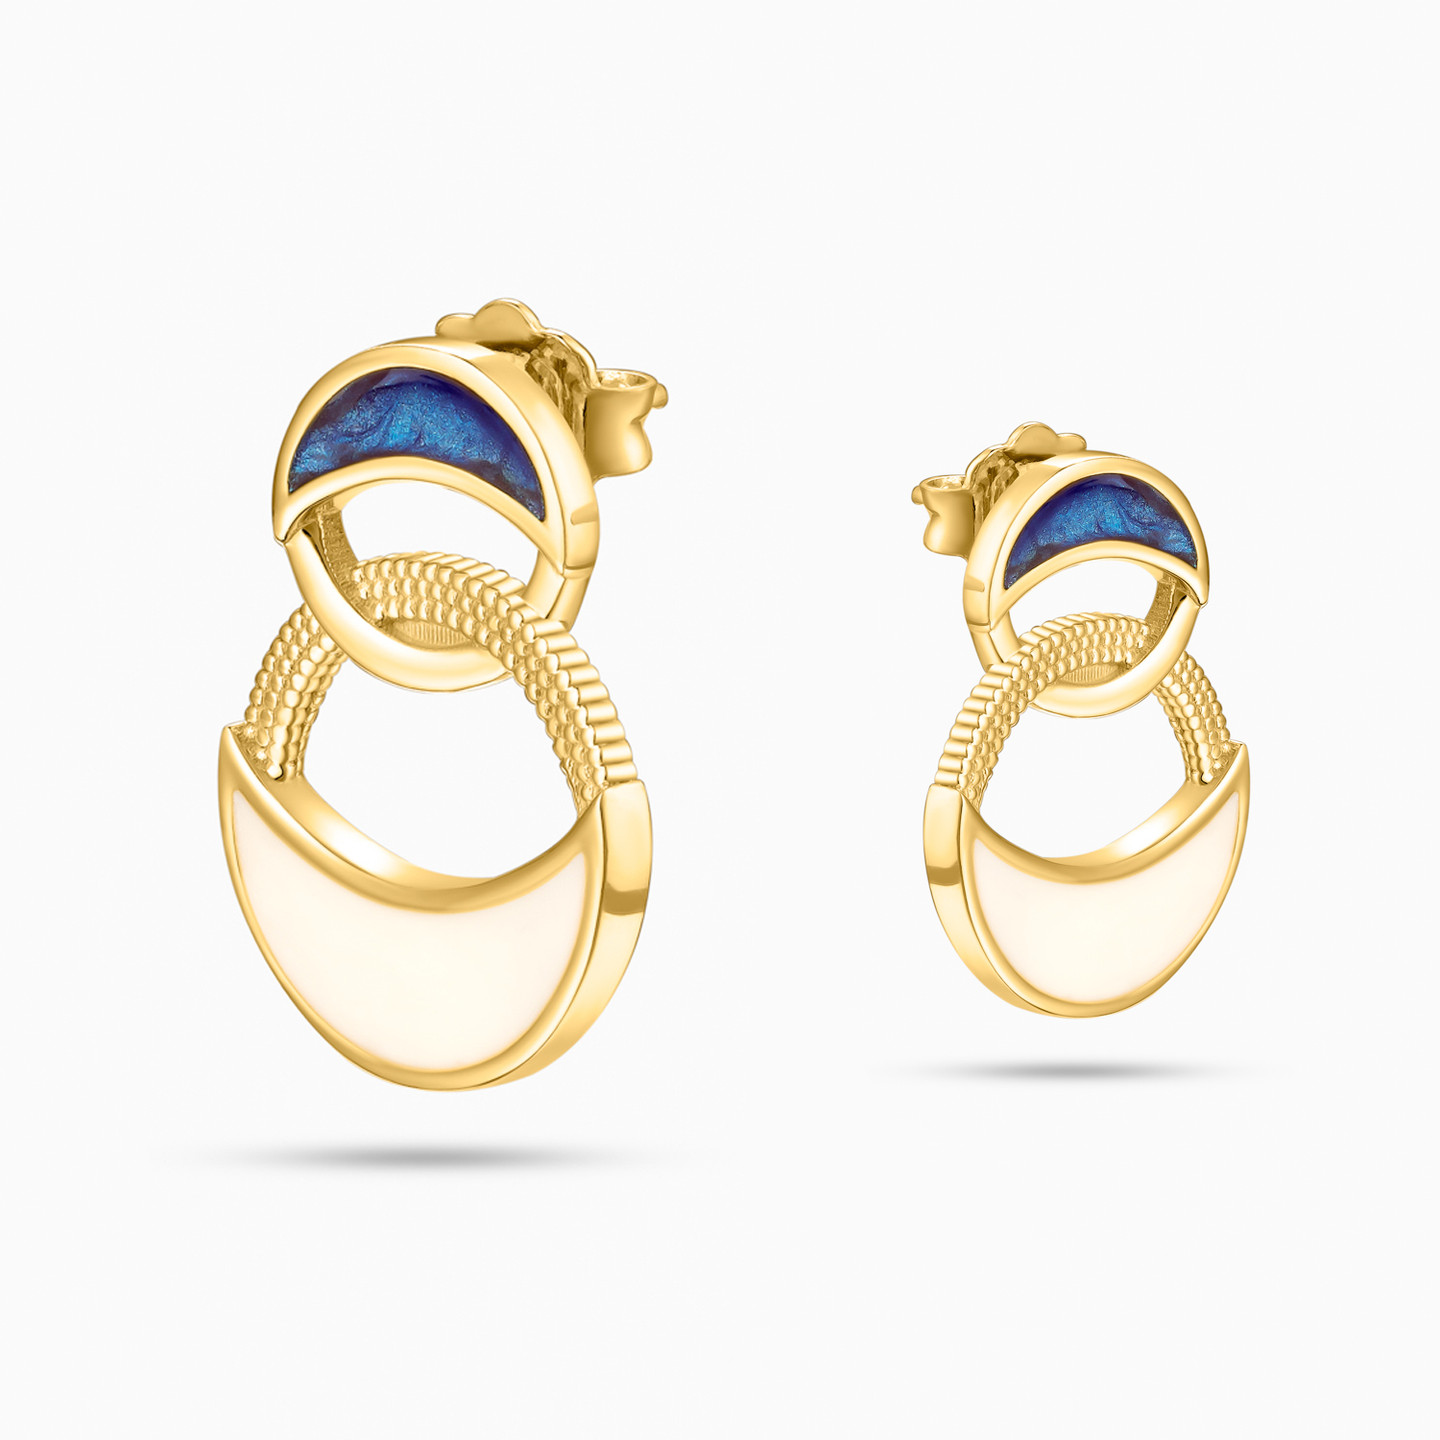 Interlocked Circles Shaped Colored Stones Stud Earrings in 18K Gold - 3